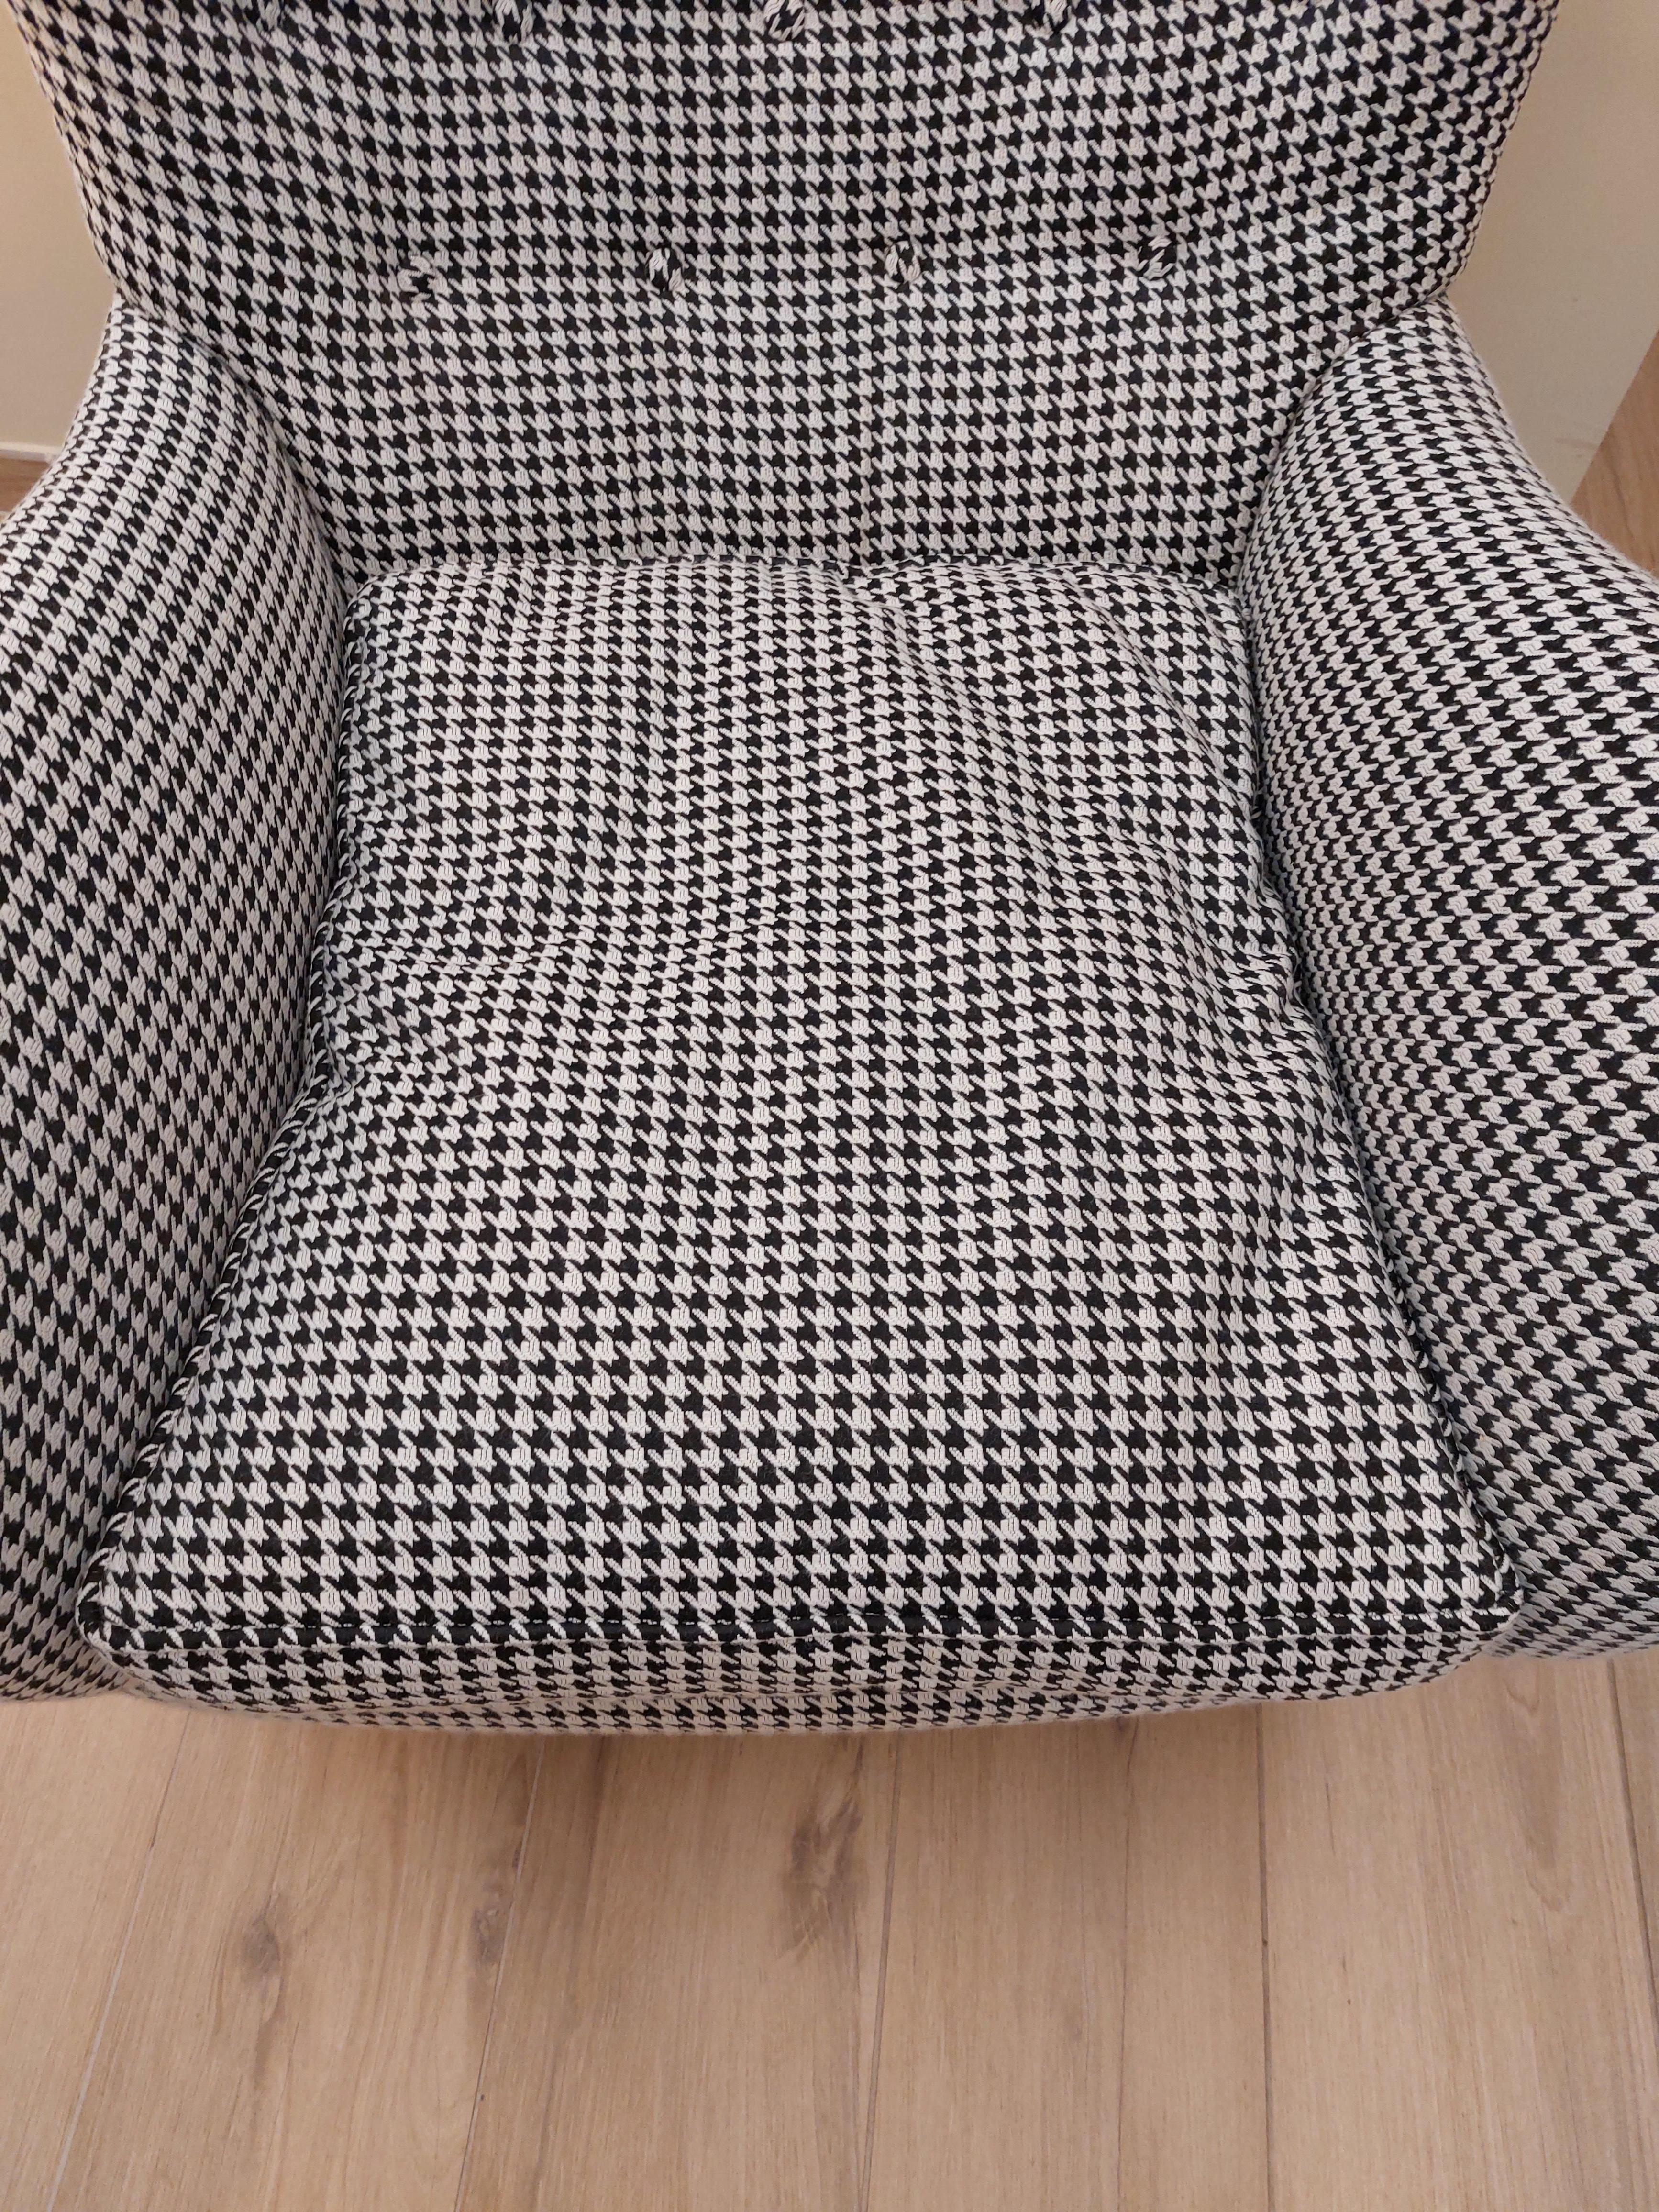 Mid-Century Modern '40s Armchair with New Houndstooth Upholstery